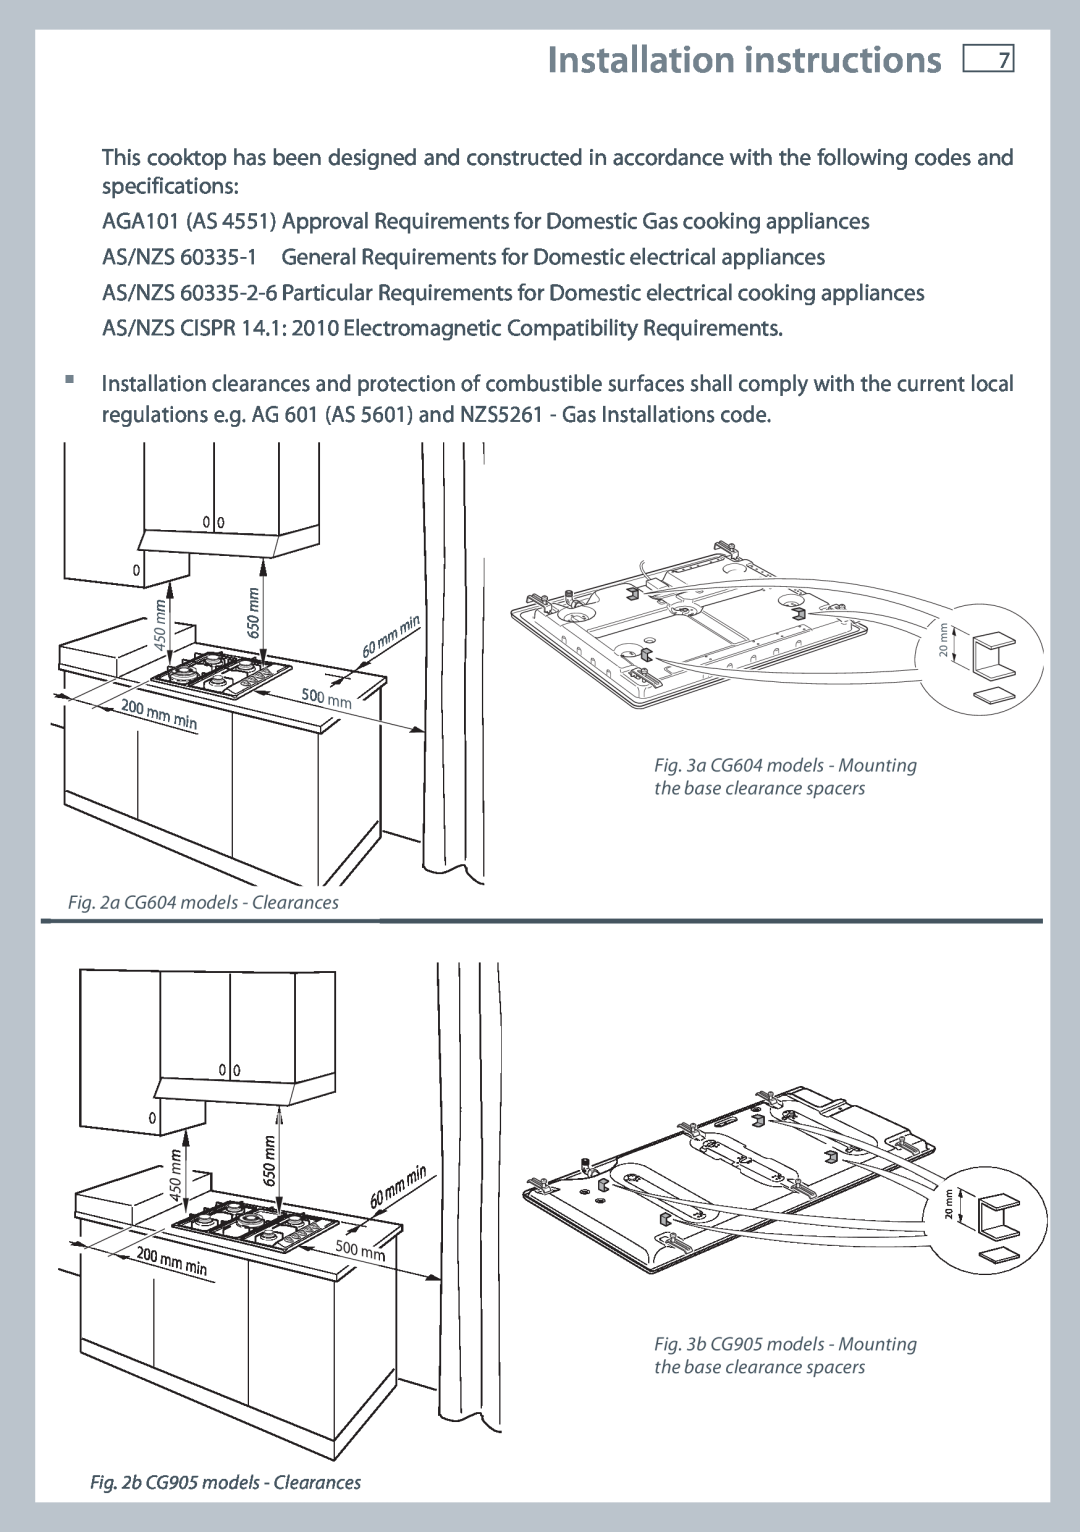 Fisher & Paykel CG905 Installation instructions, AS/NZS 60335-1 General Requirements for Domestic electrical appliances 